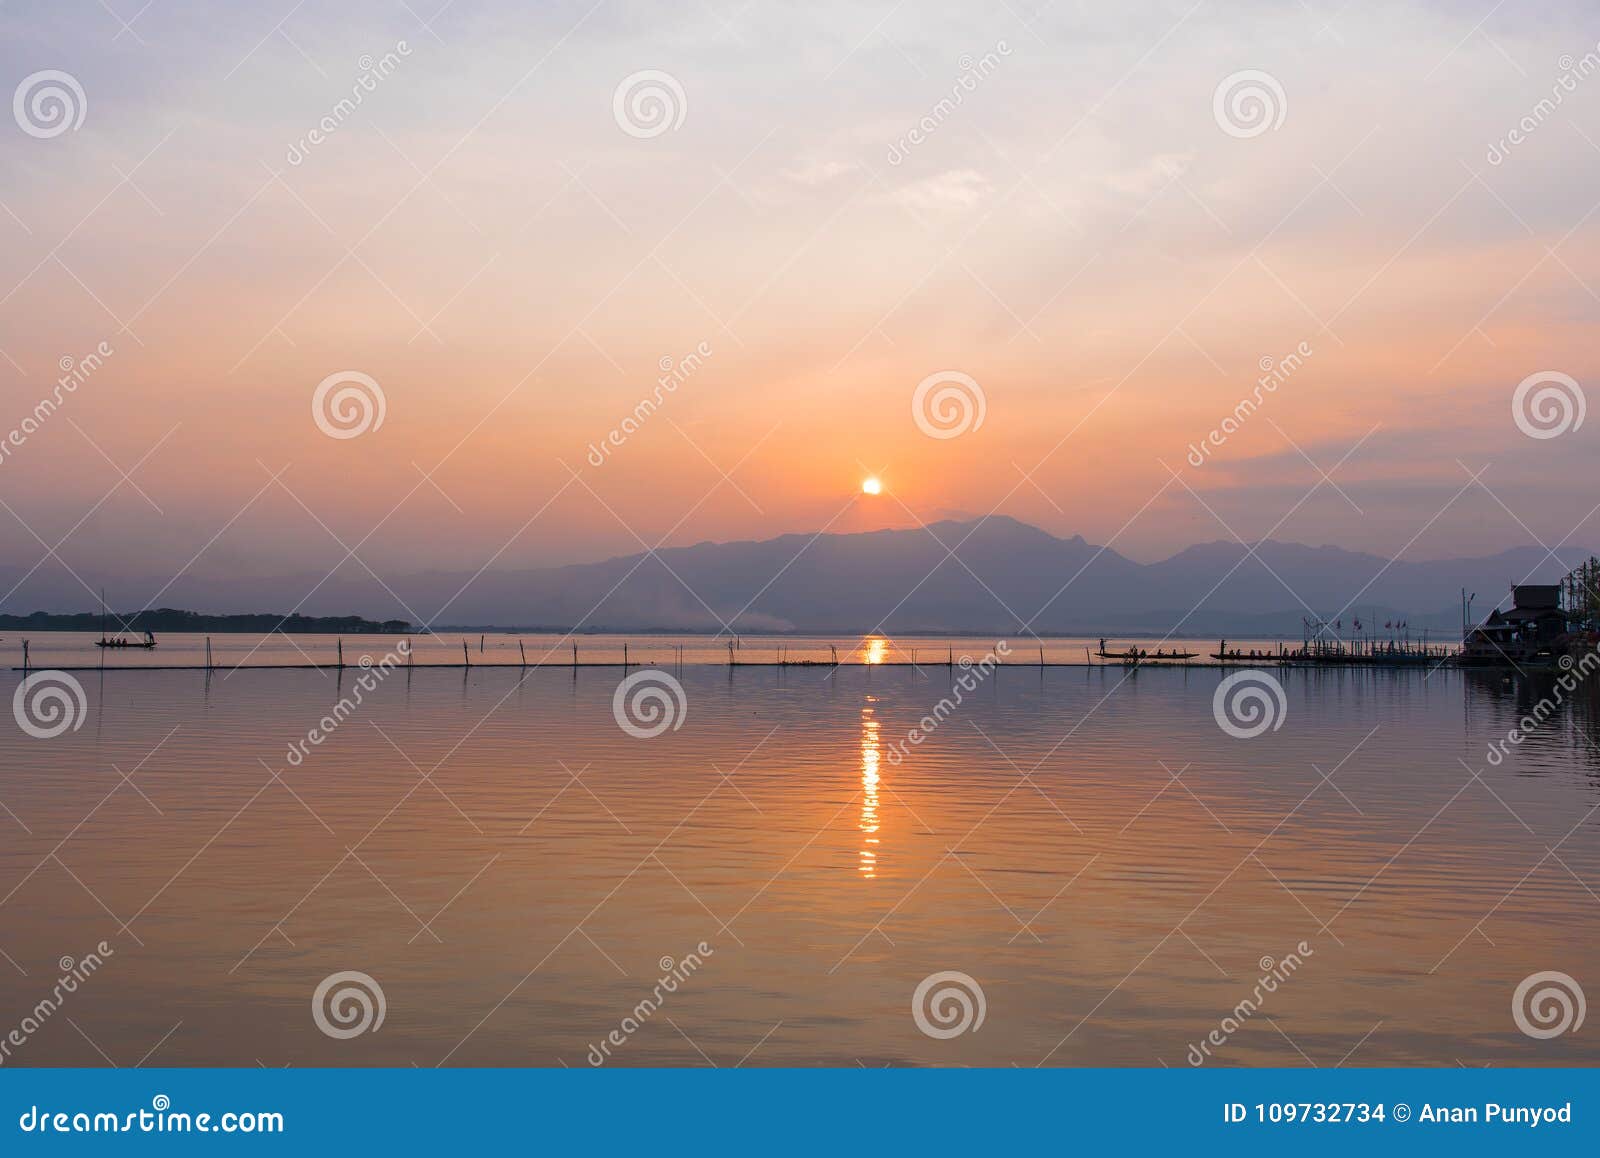 landscape view - boatman paddle boat in the lagoon lake.kwan phayao in evening time at phayao thailand